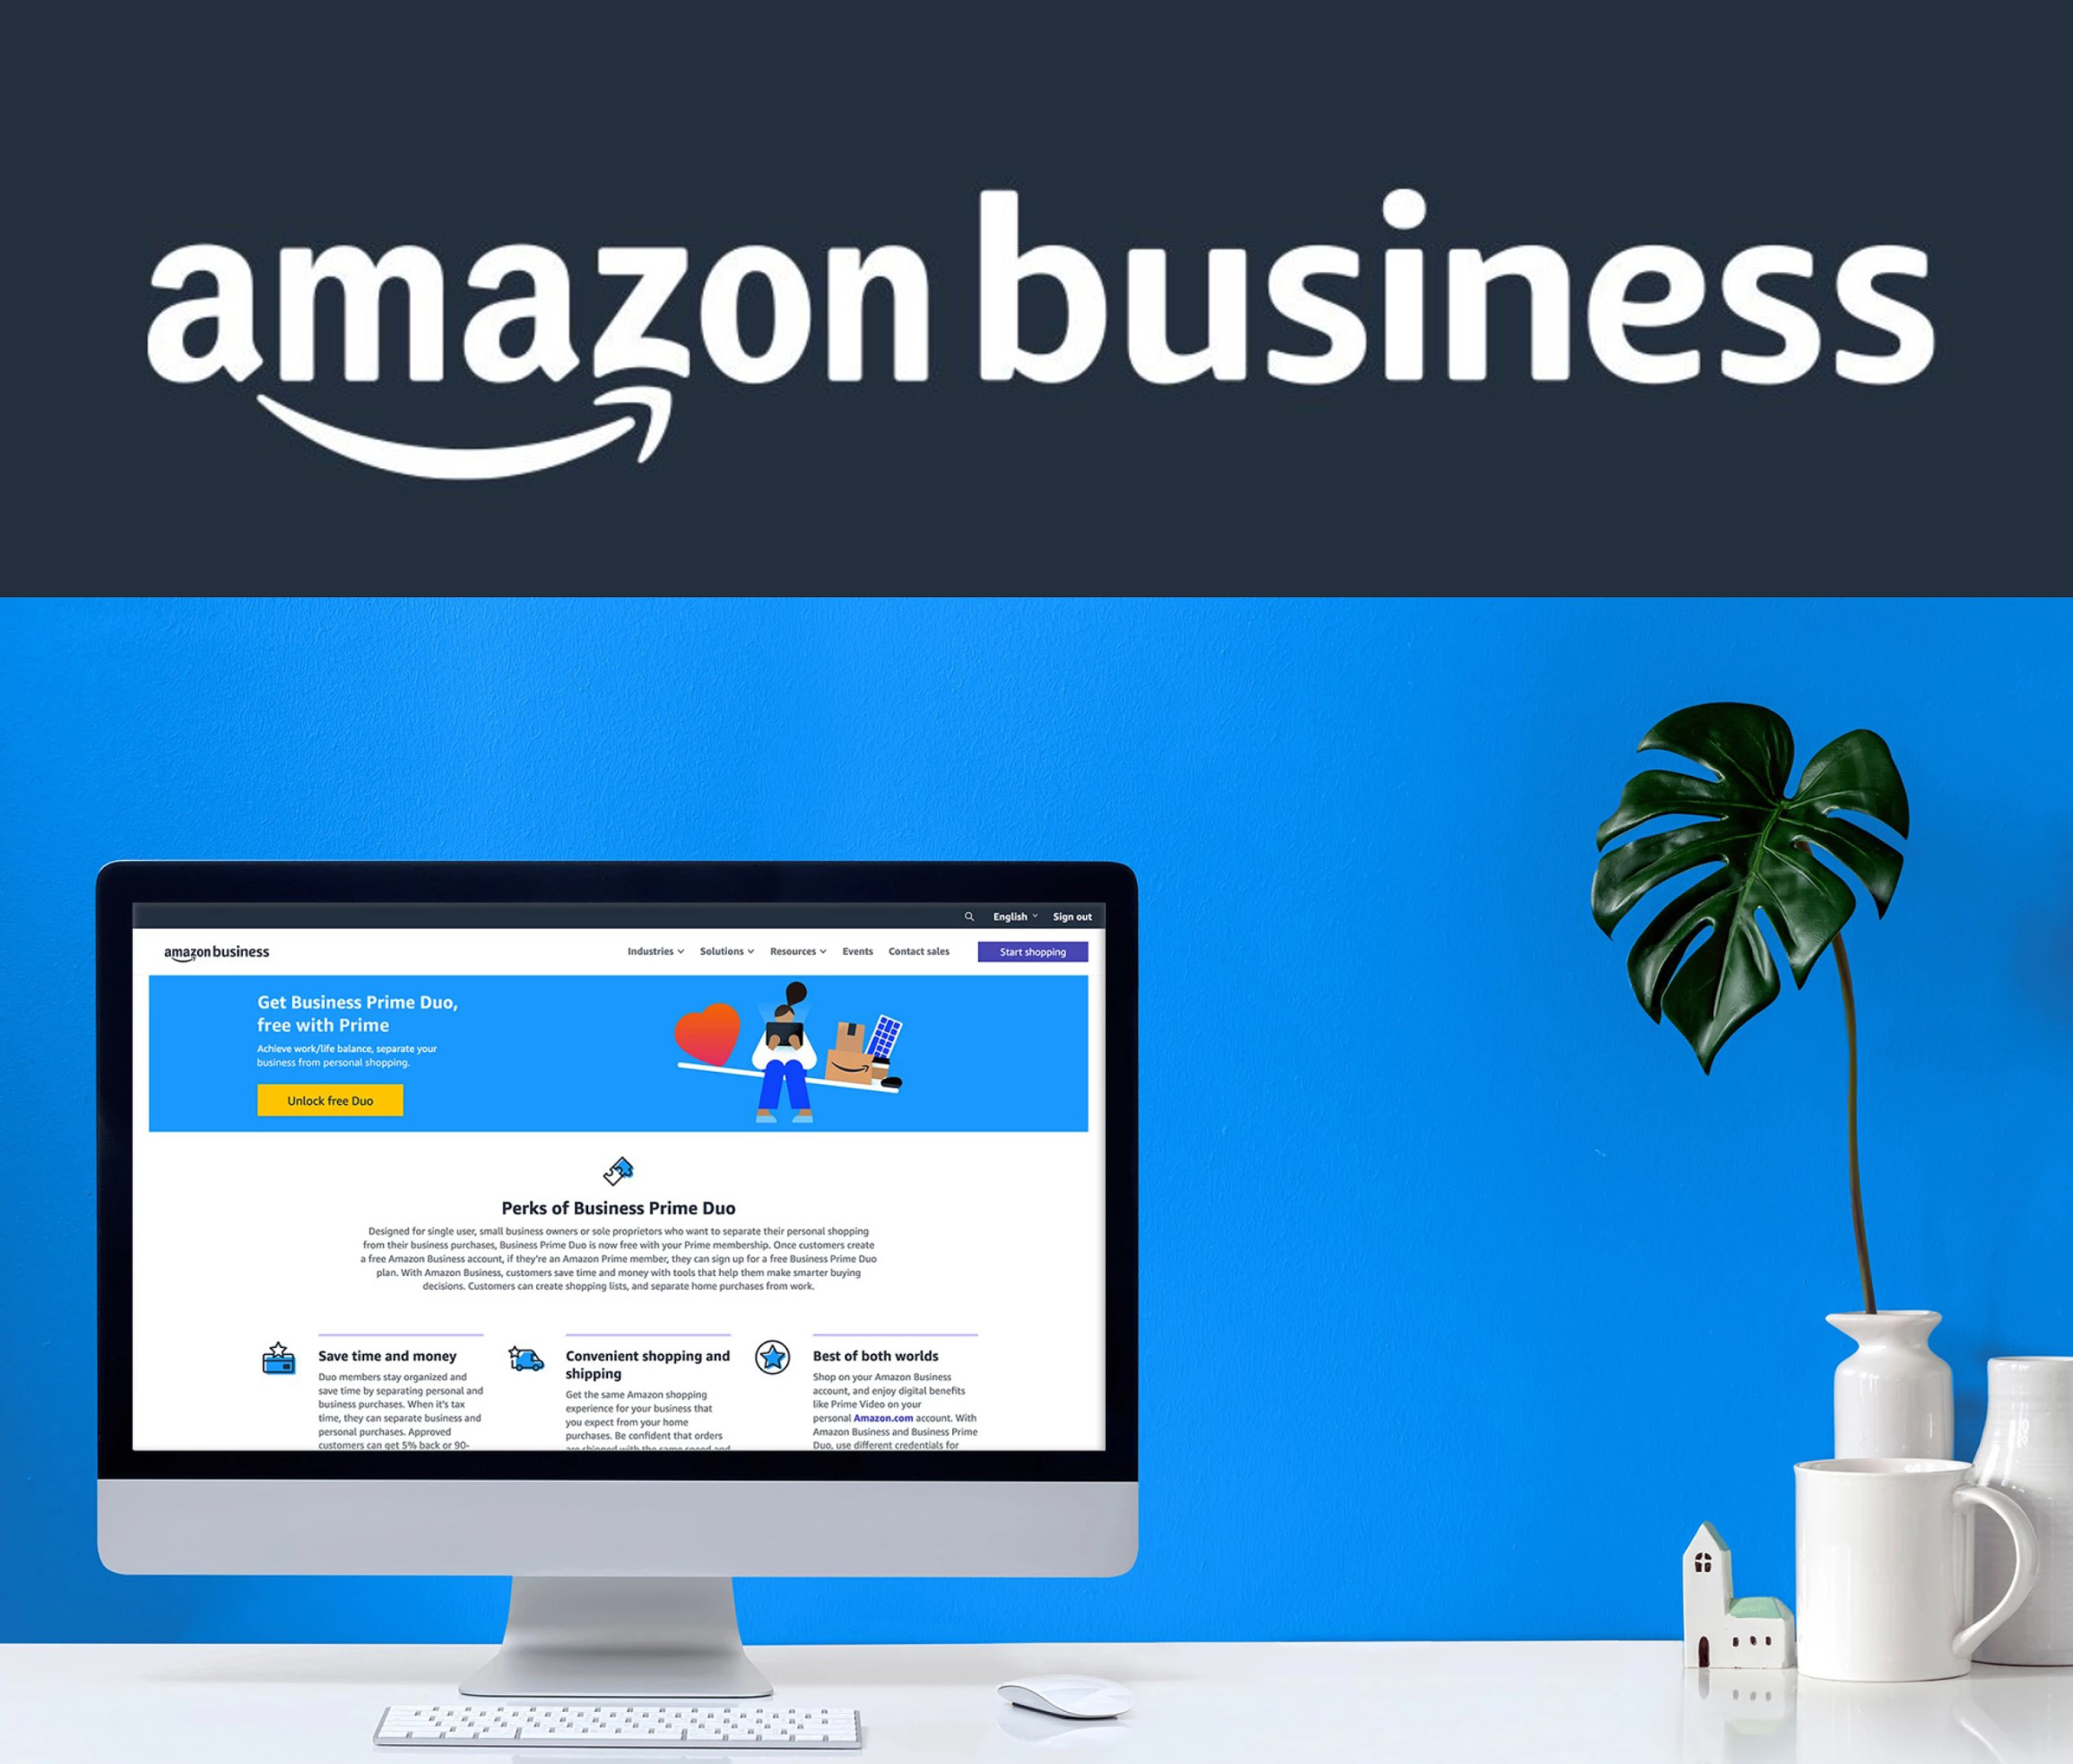 Tips for Starting an Amazon Business